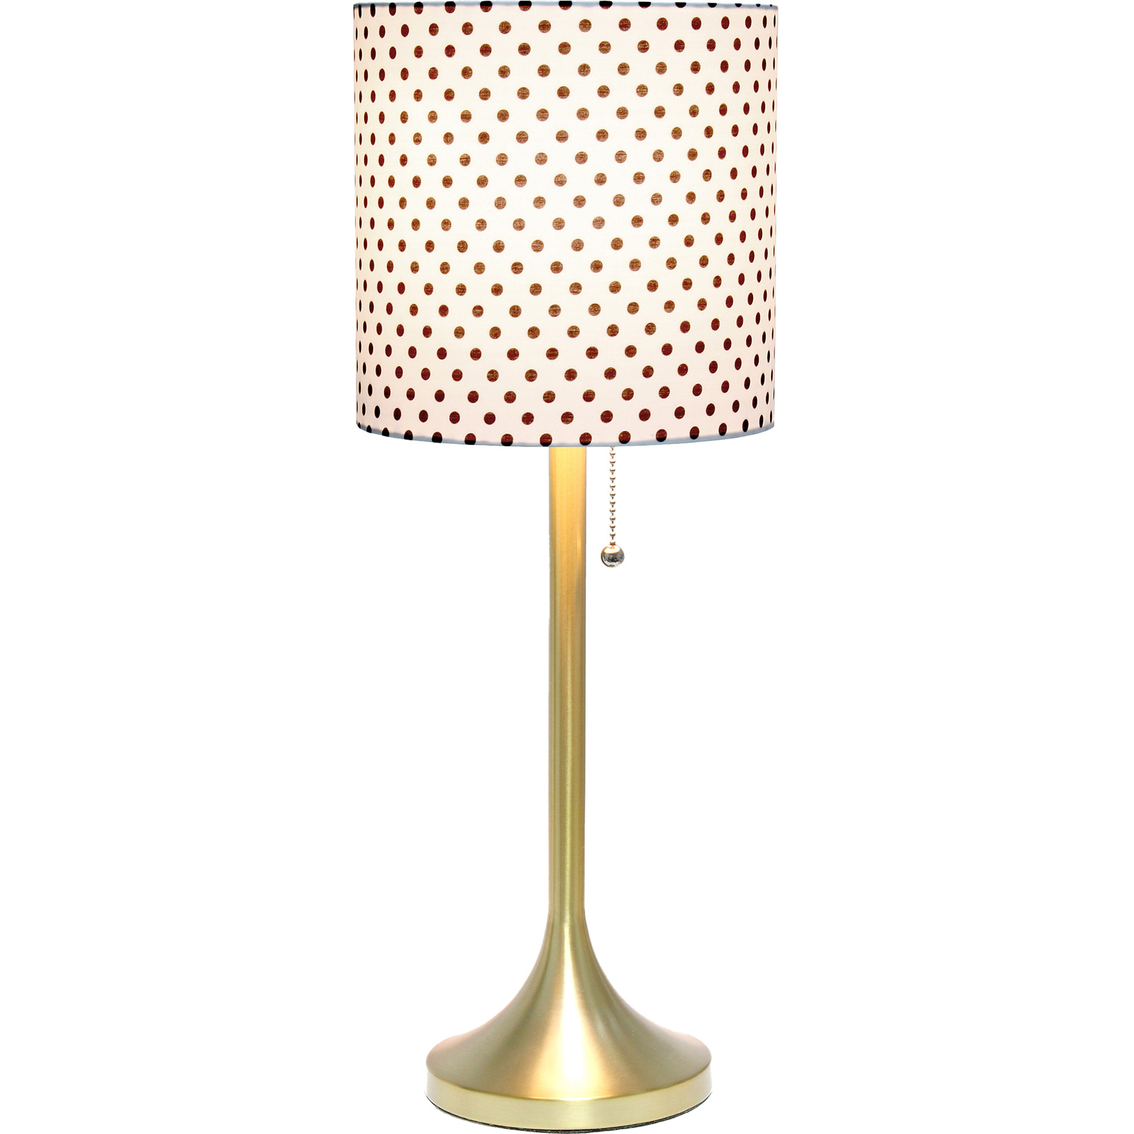 Simple Designs 21 in. Tapered Table Lamp - Image 2 of 3